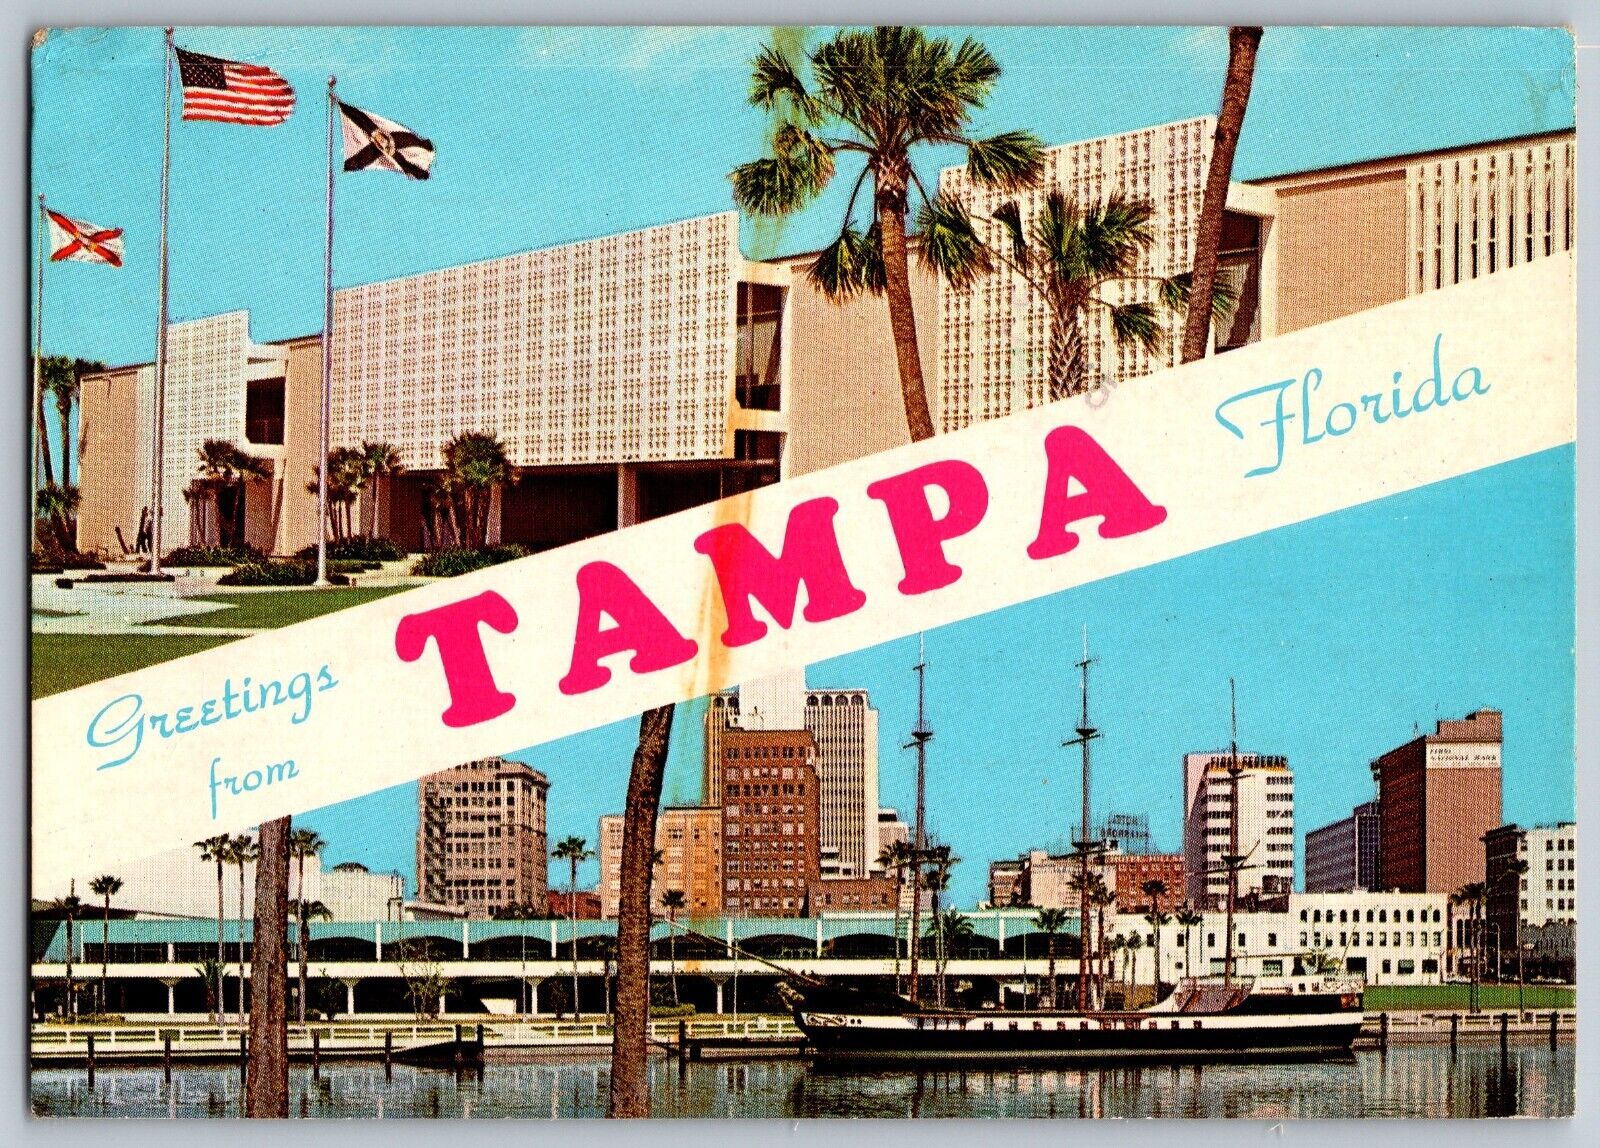 Tampa, Florida FL - Greetings from Tampa - Multiview - Vintage Postcard 4x6